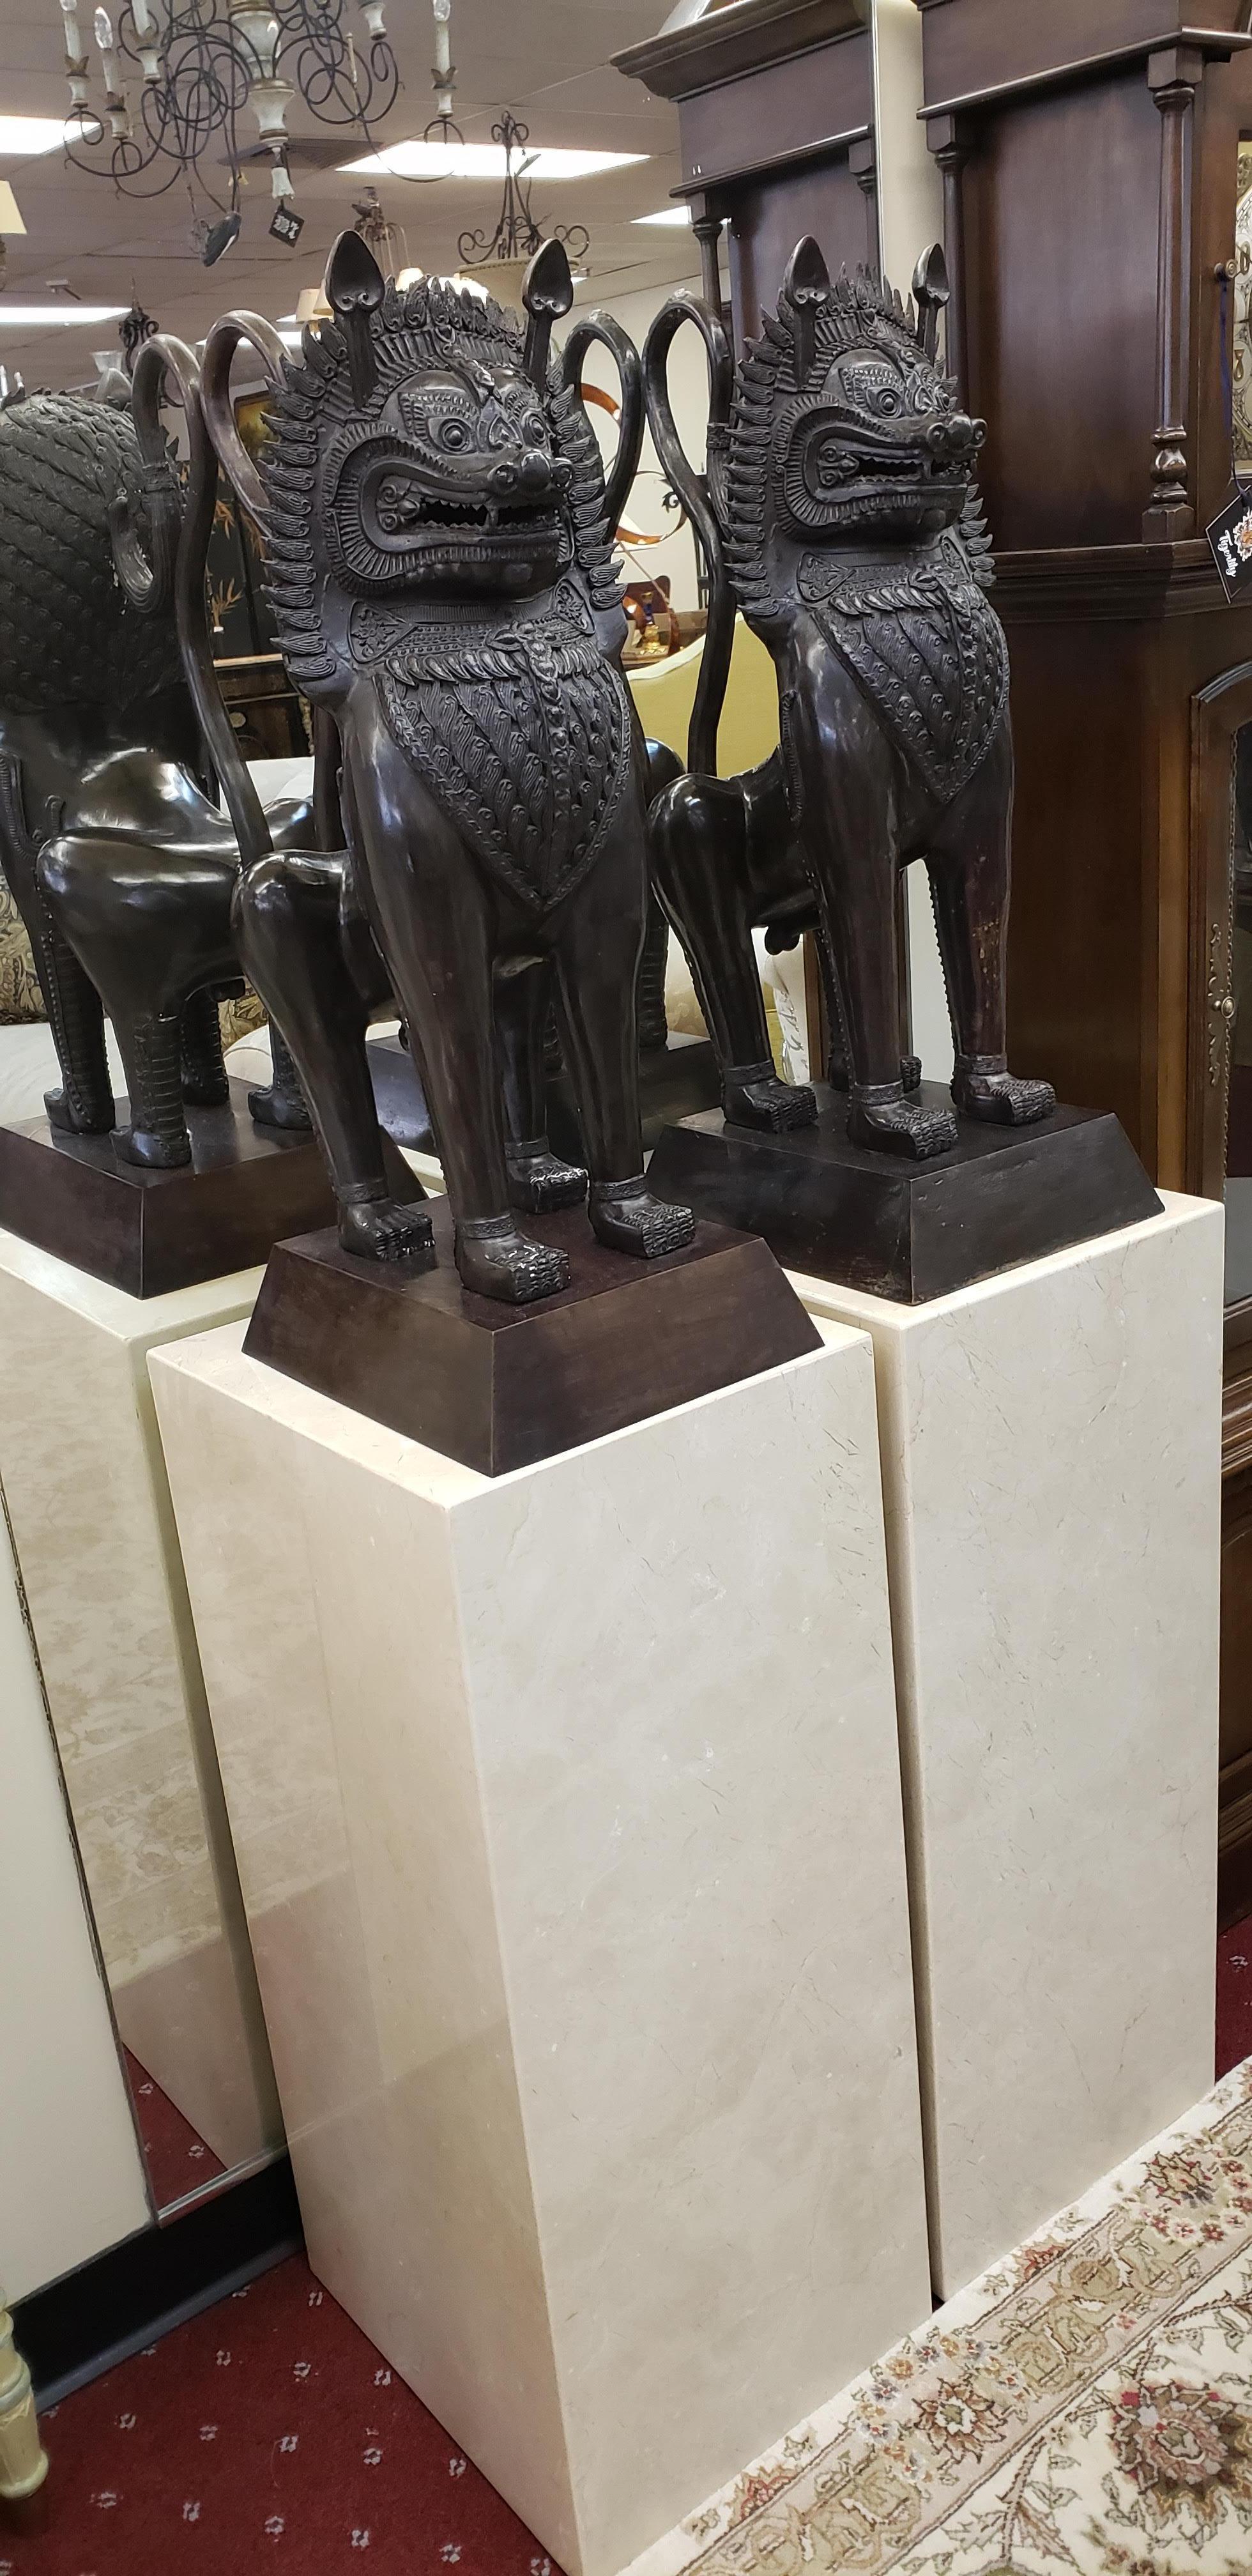 Pair of bronze cast Foo Dogs on a marble pedestal. The pair will guard your entryway or any space in your home.
Guardian lions, also known as komainu, shishi, or foo dogs, are intimidating, mythical, lion-like creatures. They symbolize prosperity,